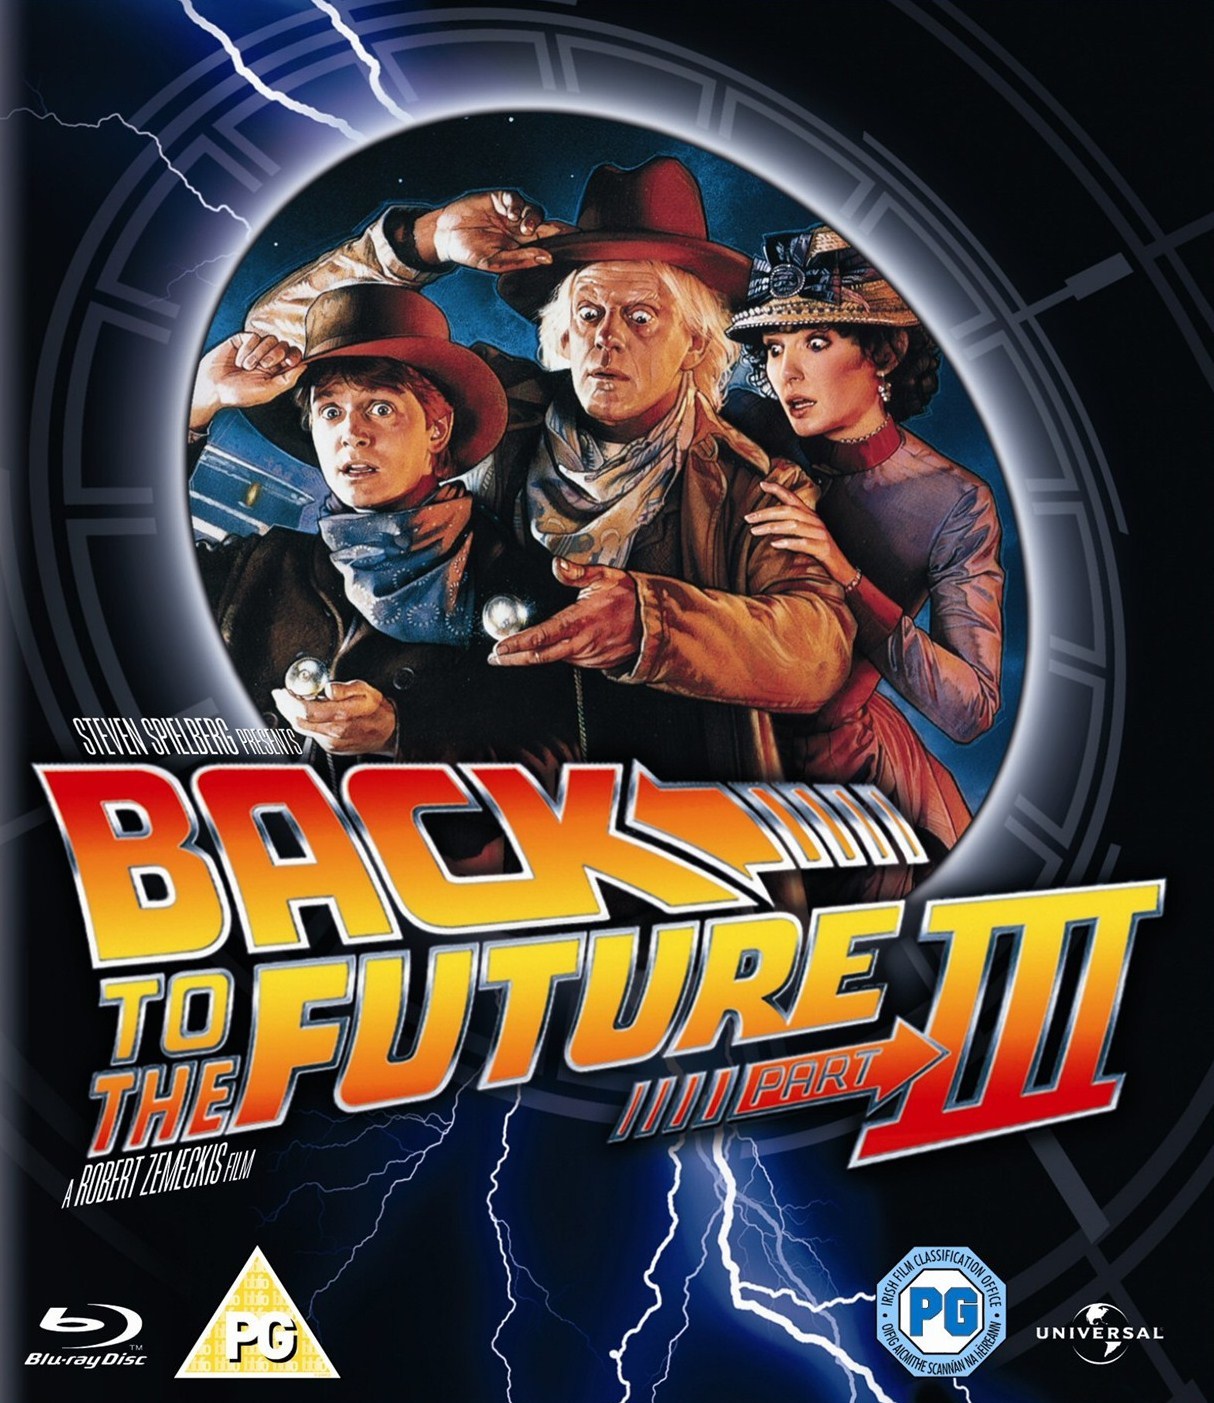 Back To The Future Part III Backgrounds, Compatible - PC, Mobile, Gadgets| 1214x1403 px